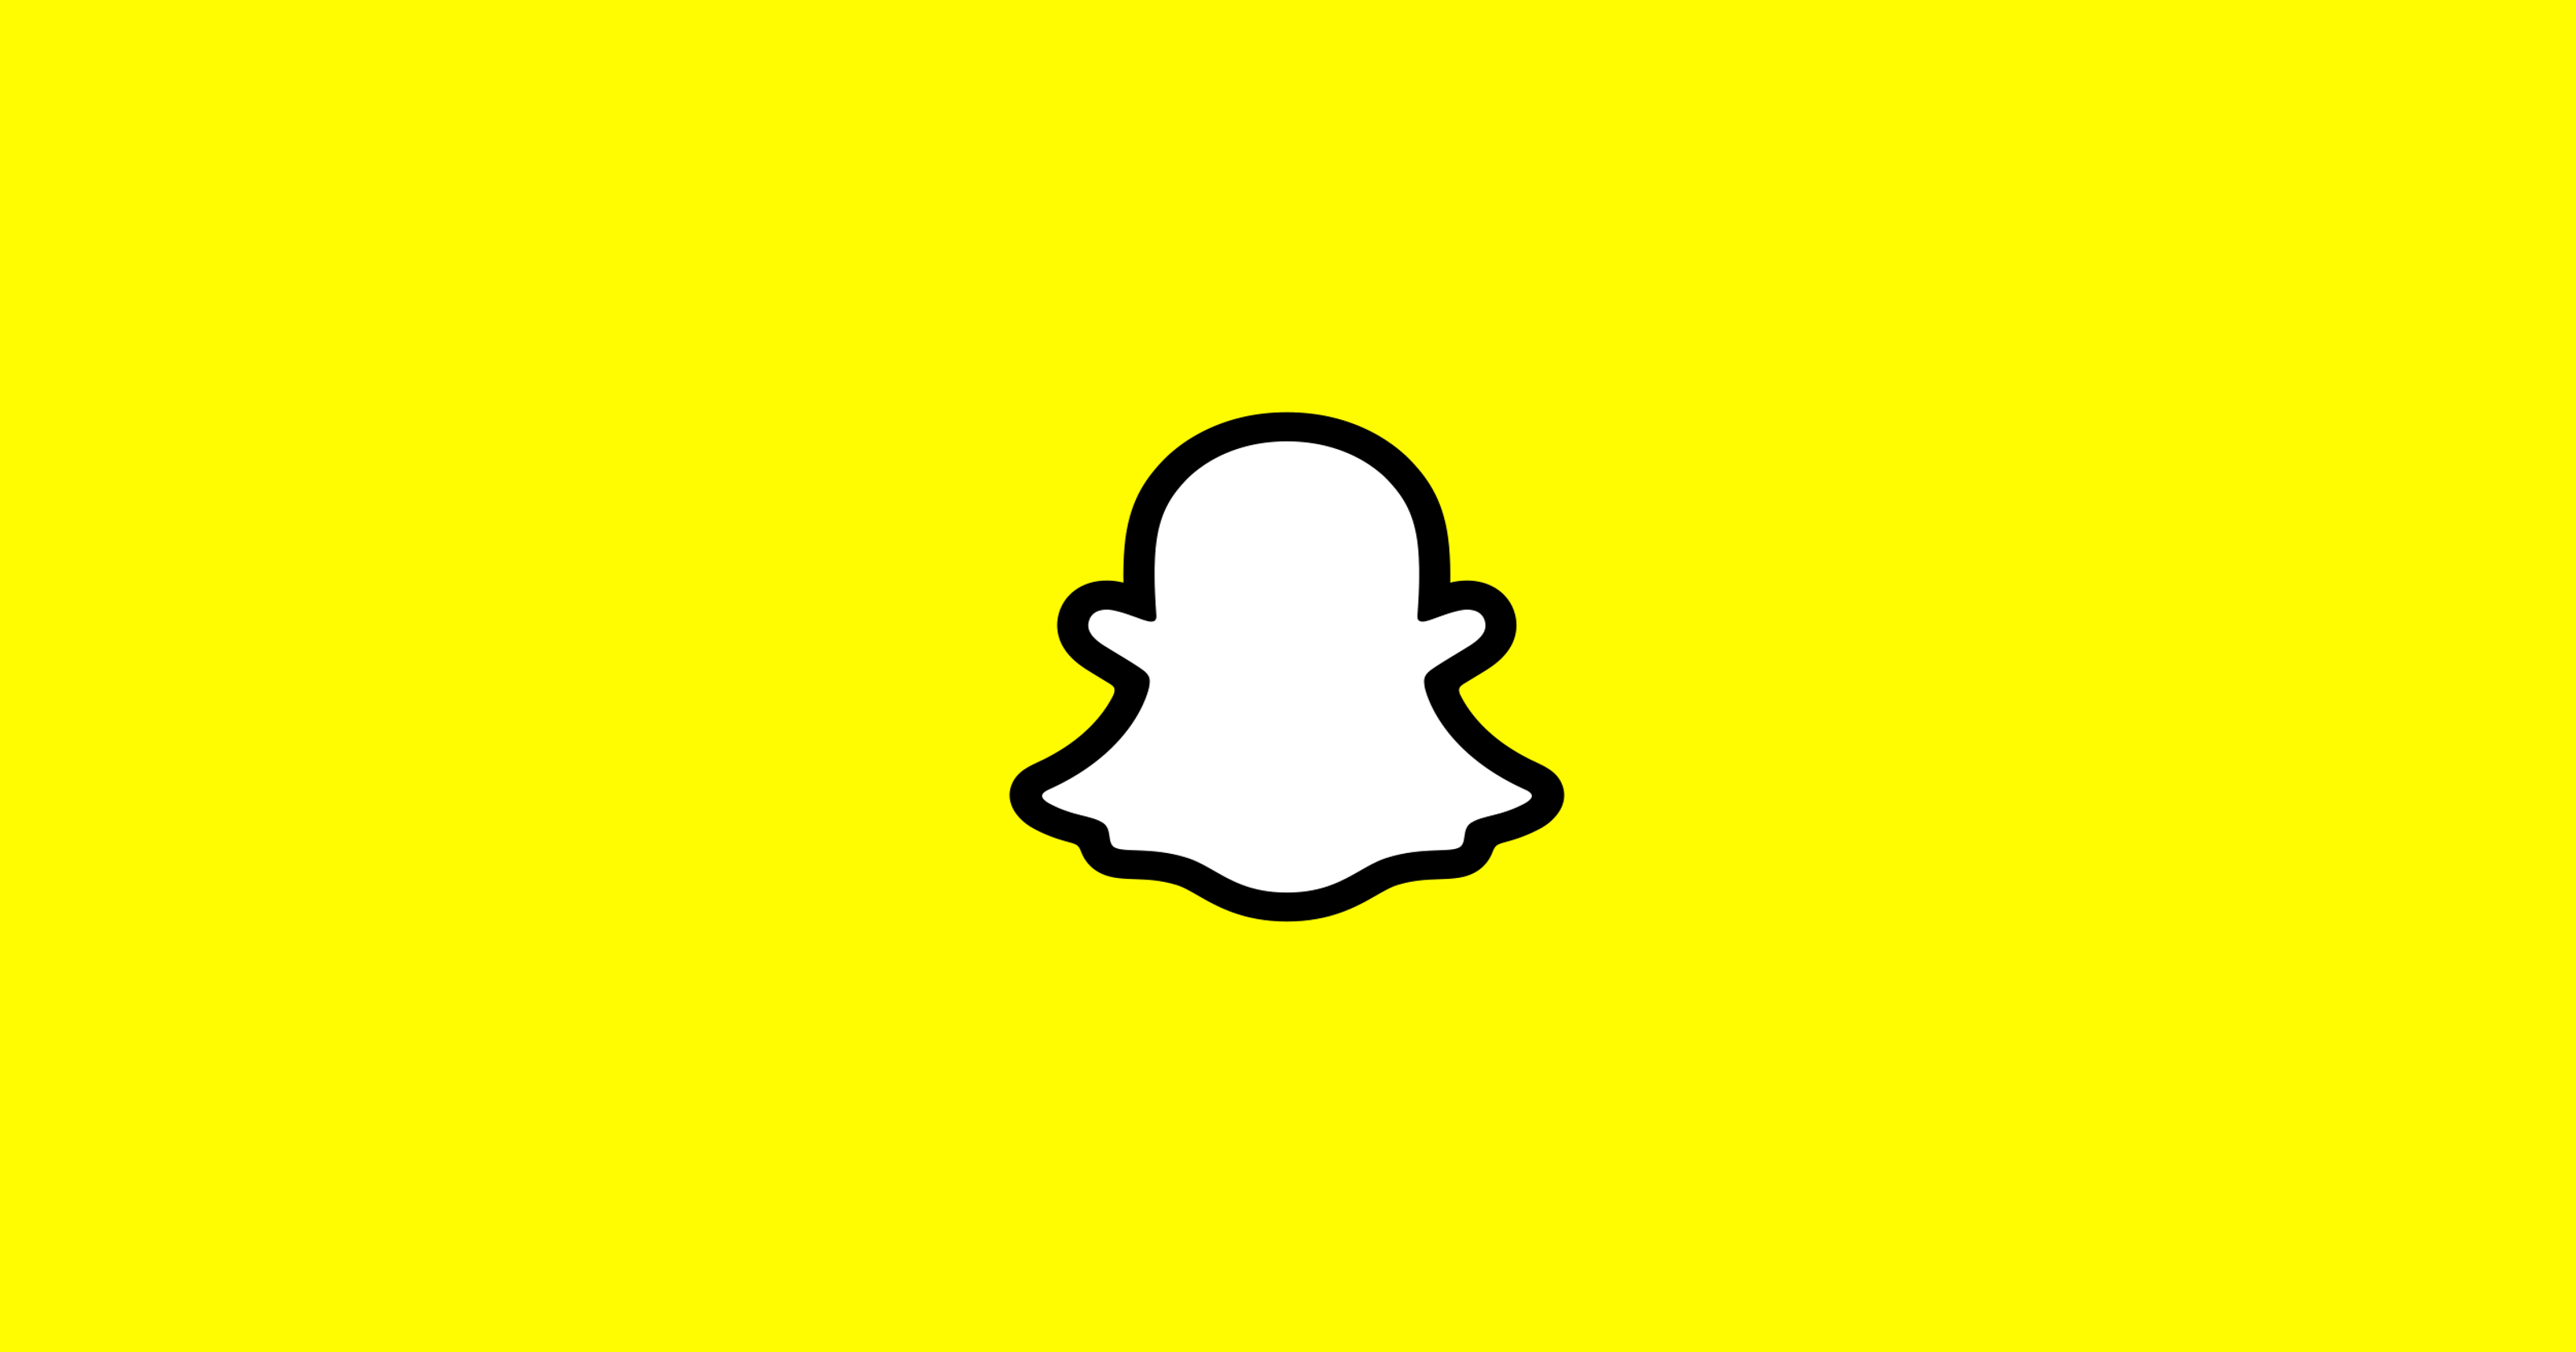 The Twitterverse Is Not Happy With The New Snapchat Logo